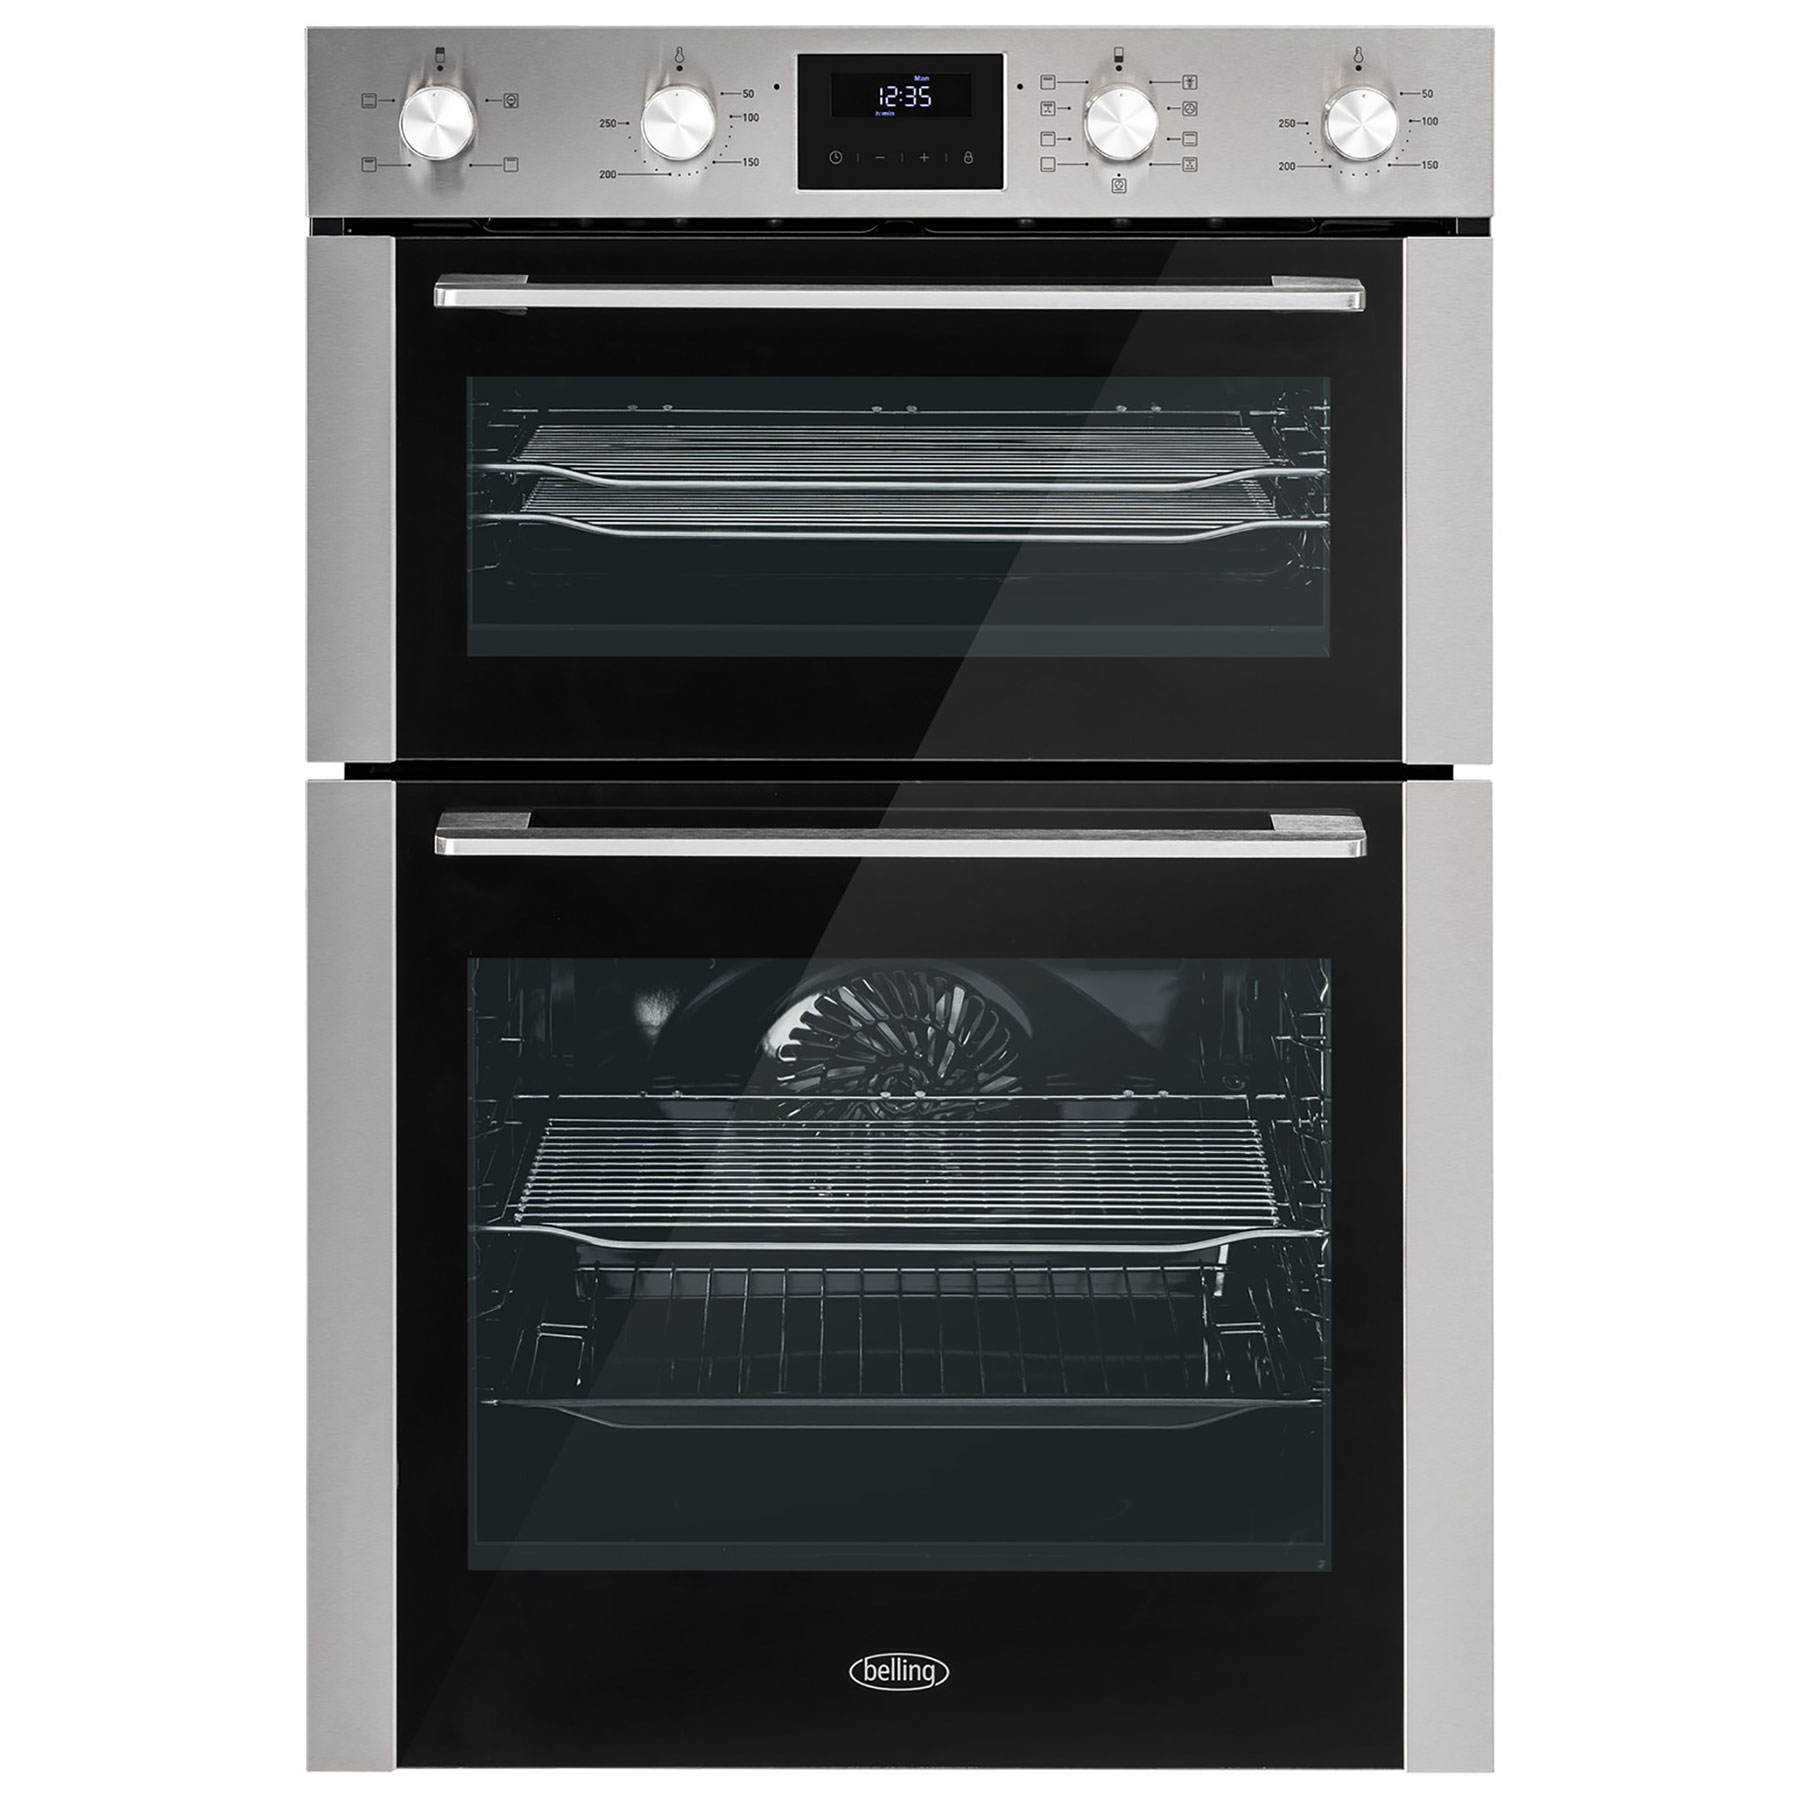 Image of Belling 444411402 90cm Built In Electric Double Oven in St Steel A Rat